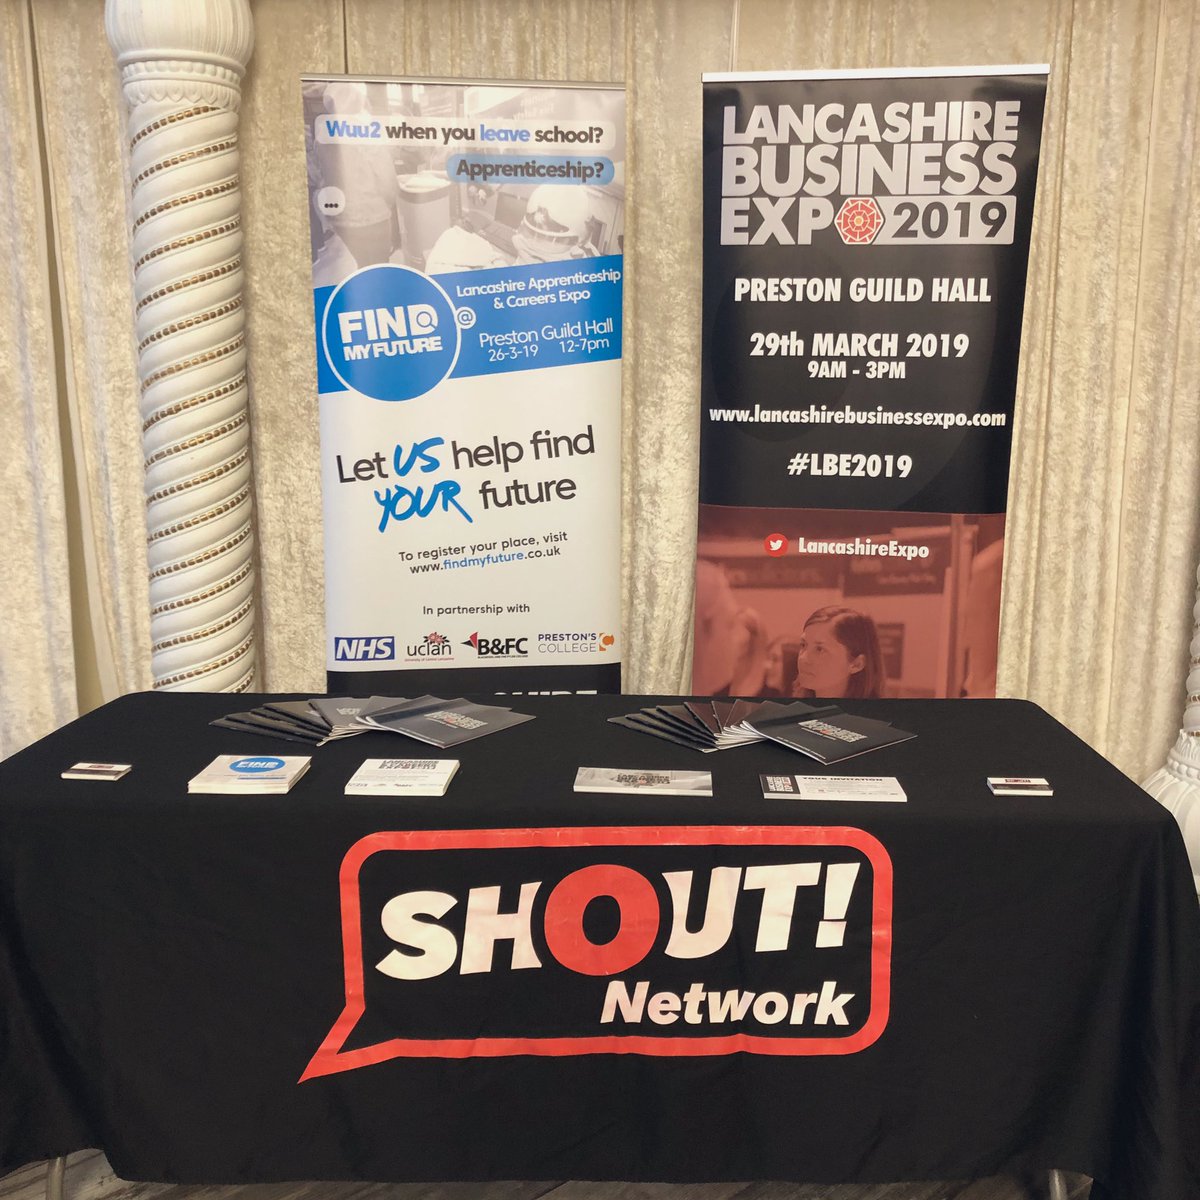 All set up this morning for the @HiveBwD at the @Grandvenue in #Blackburn! If you’re attending, make sure you come and say hello to find out all about the @lancsappexpo & the @LancashireExpo! #lancsappexpo #LBE2019 😃